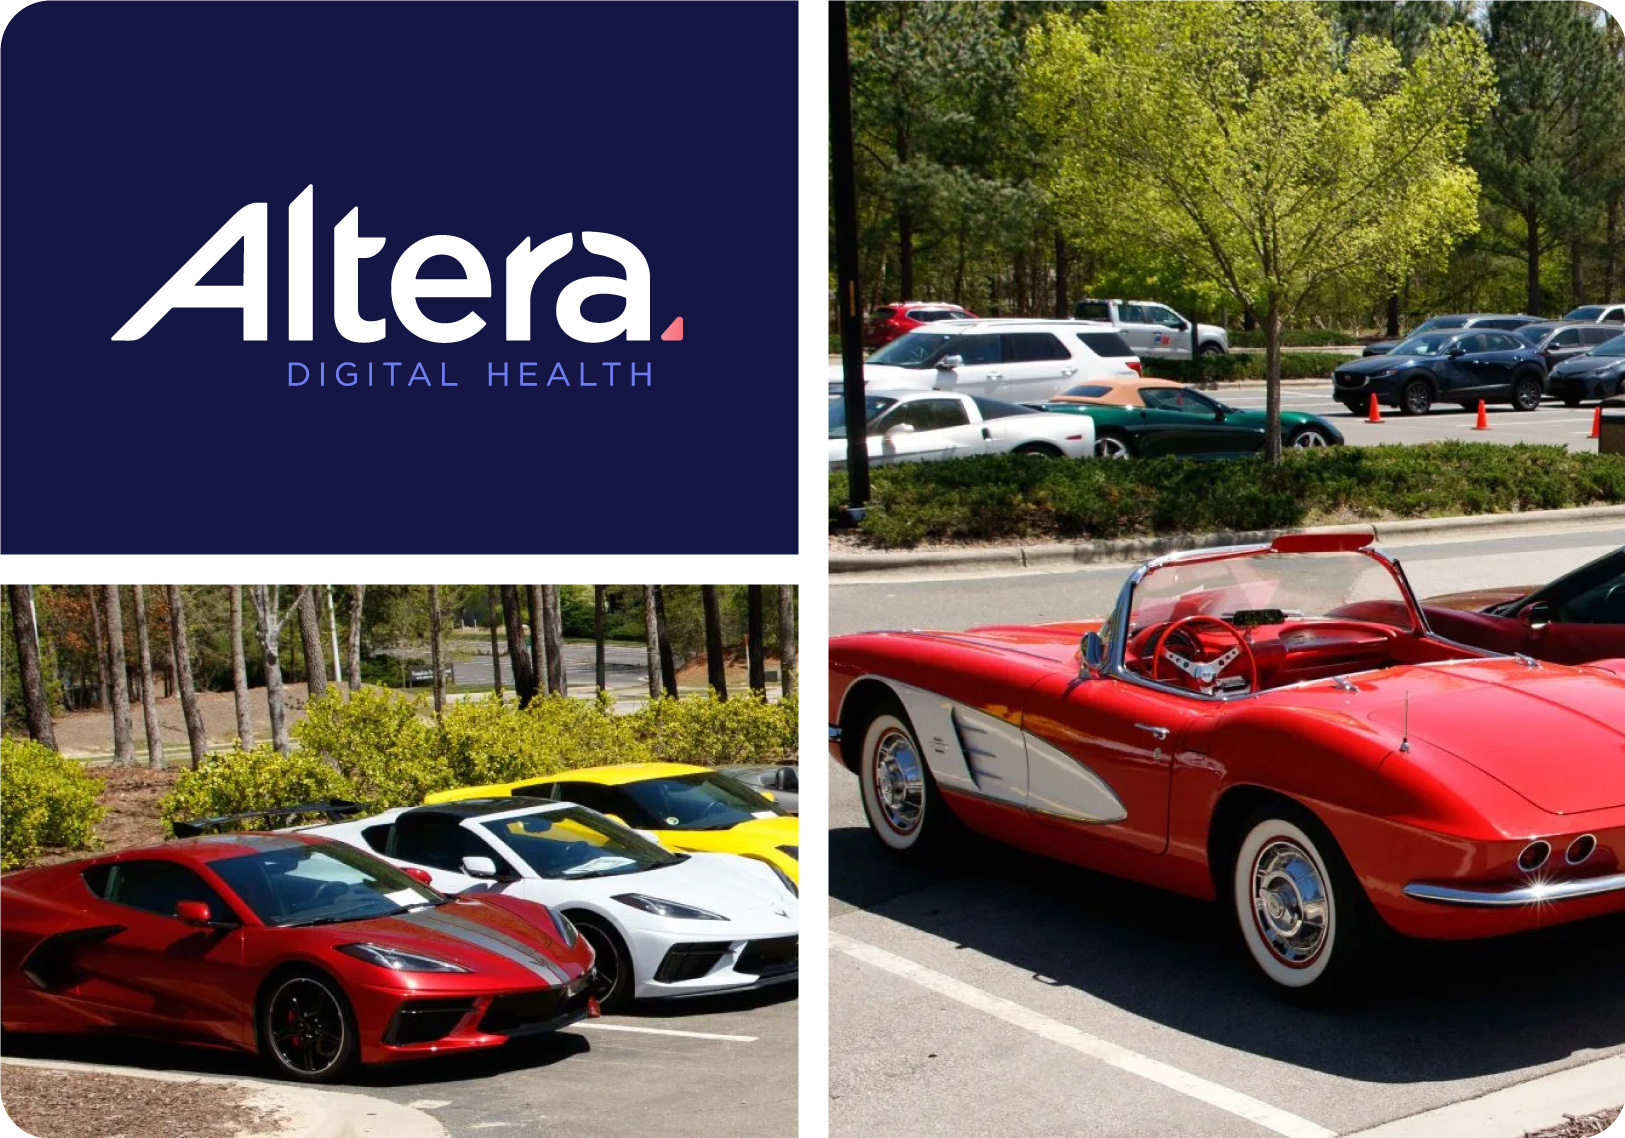 Altera participates in car show to raise money for the Raleigh TBI (Traumatic Brain Injury) facility.